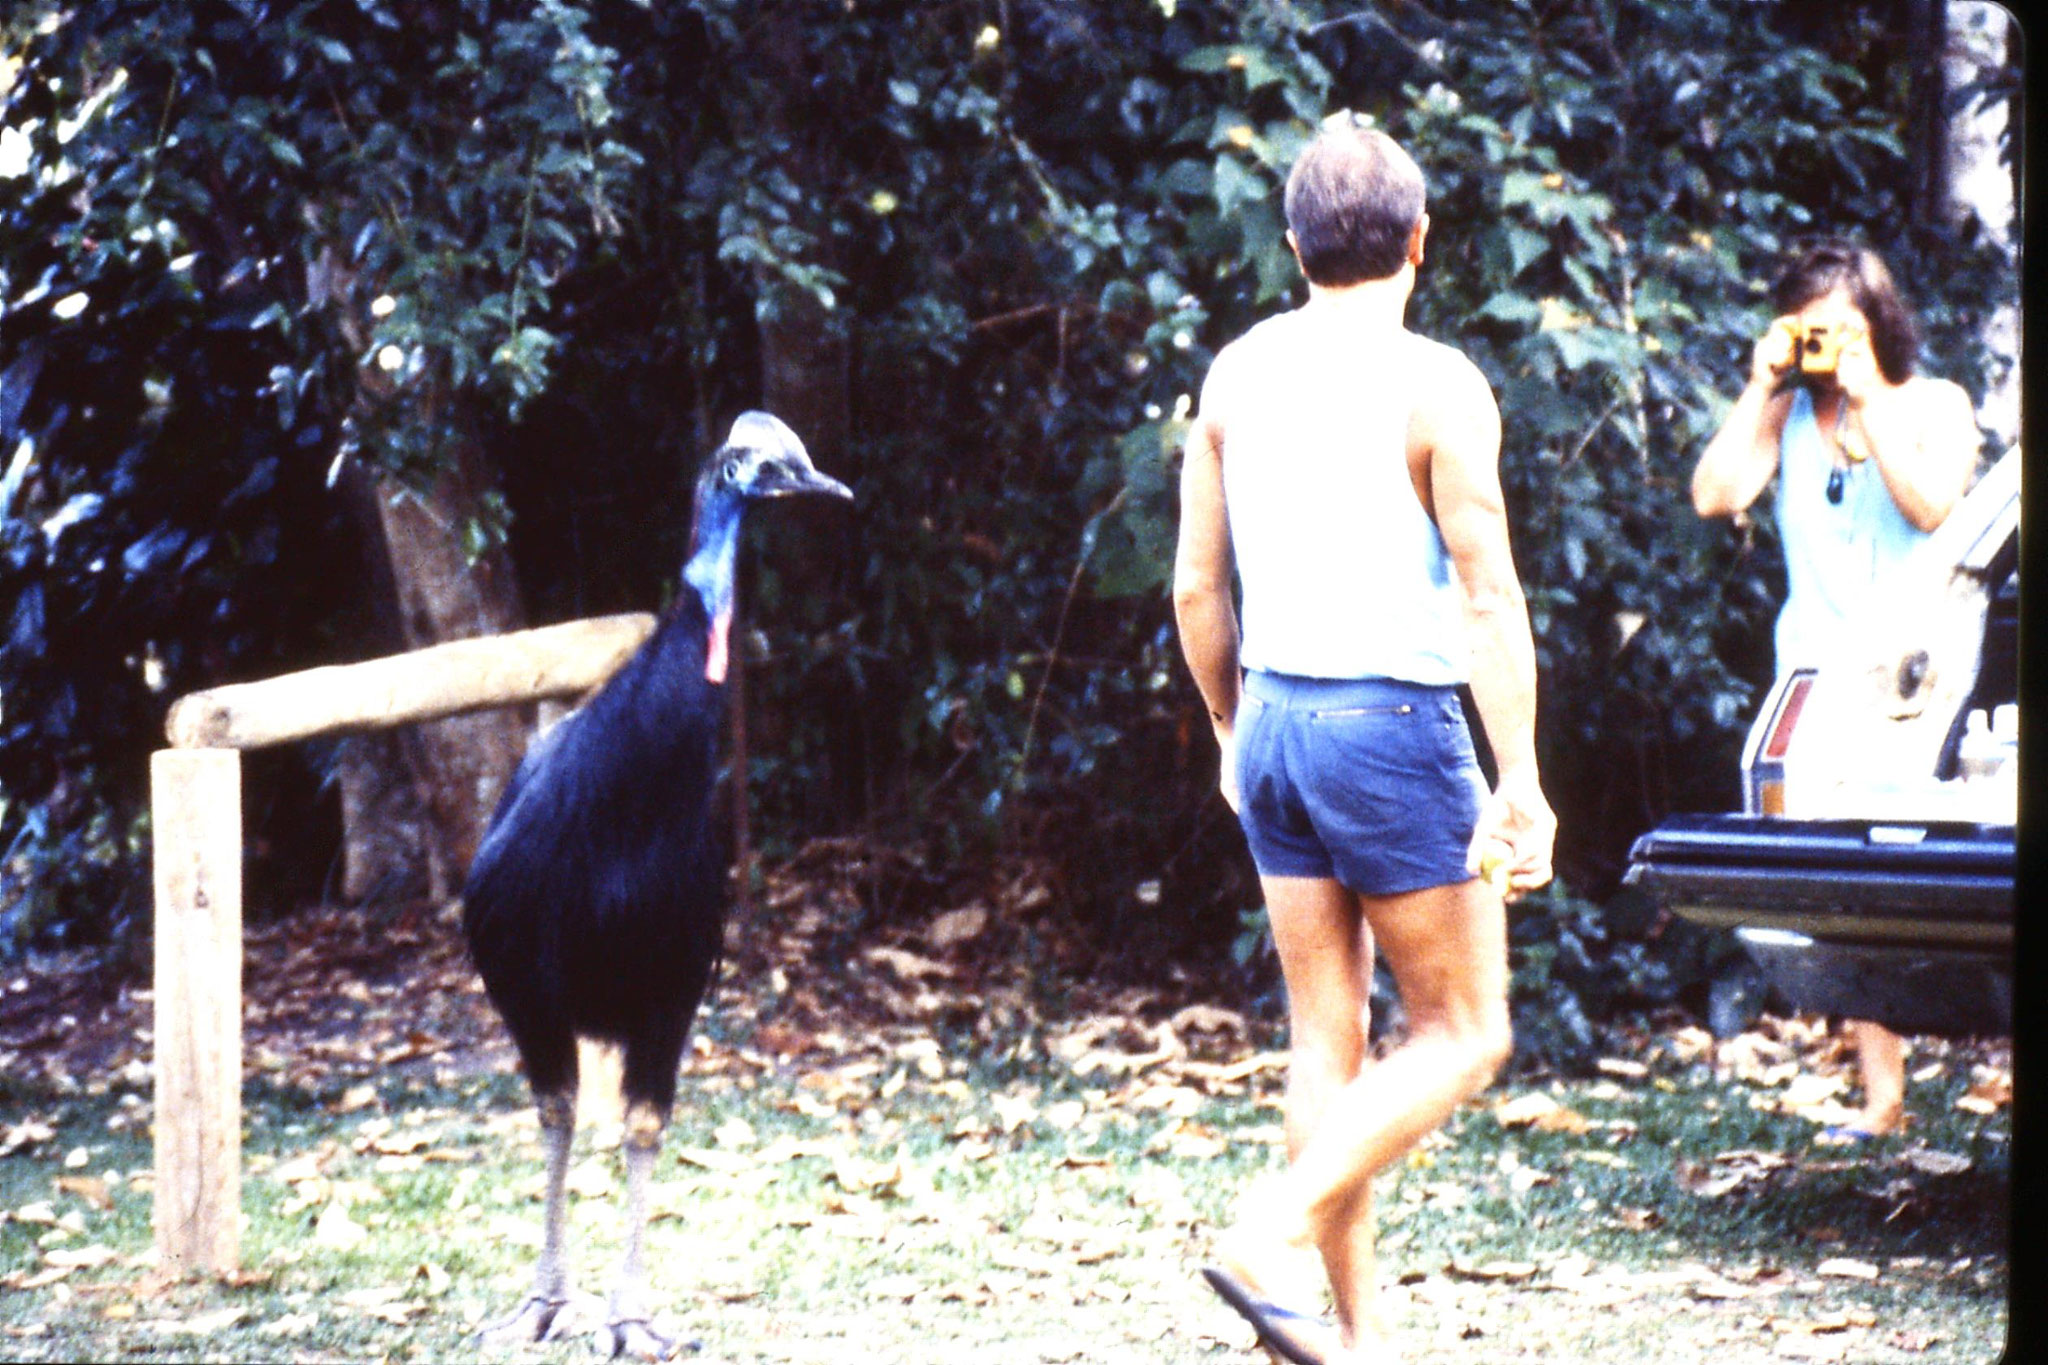 29/10/1990: 7: Mission Beach, cassowary & campers